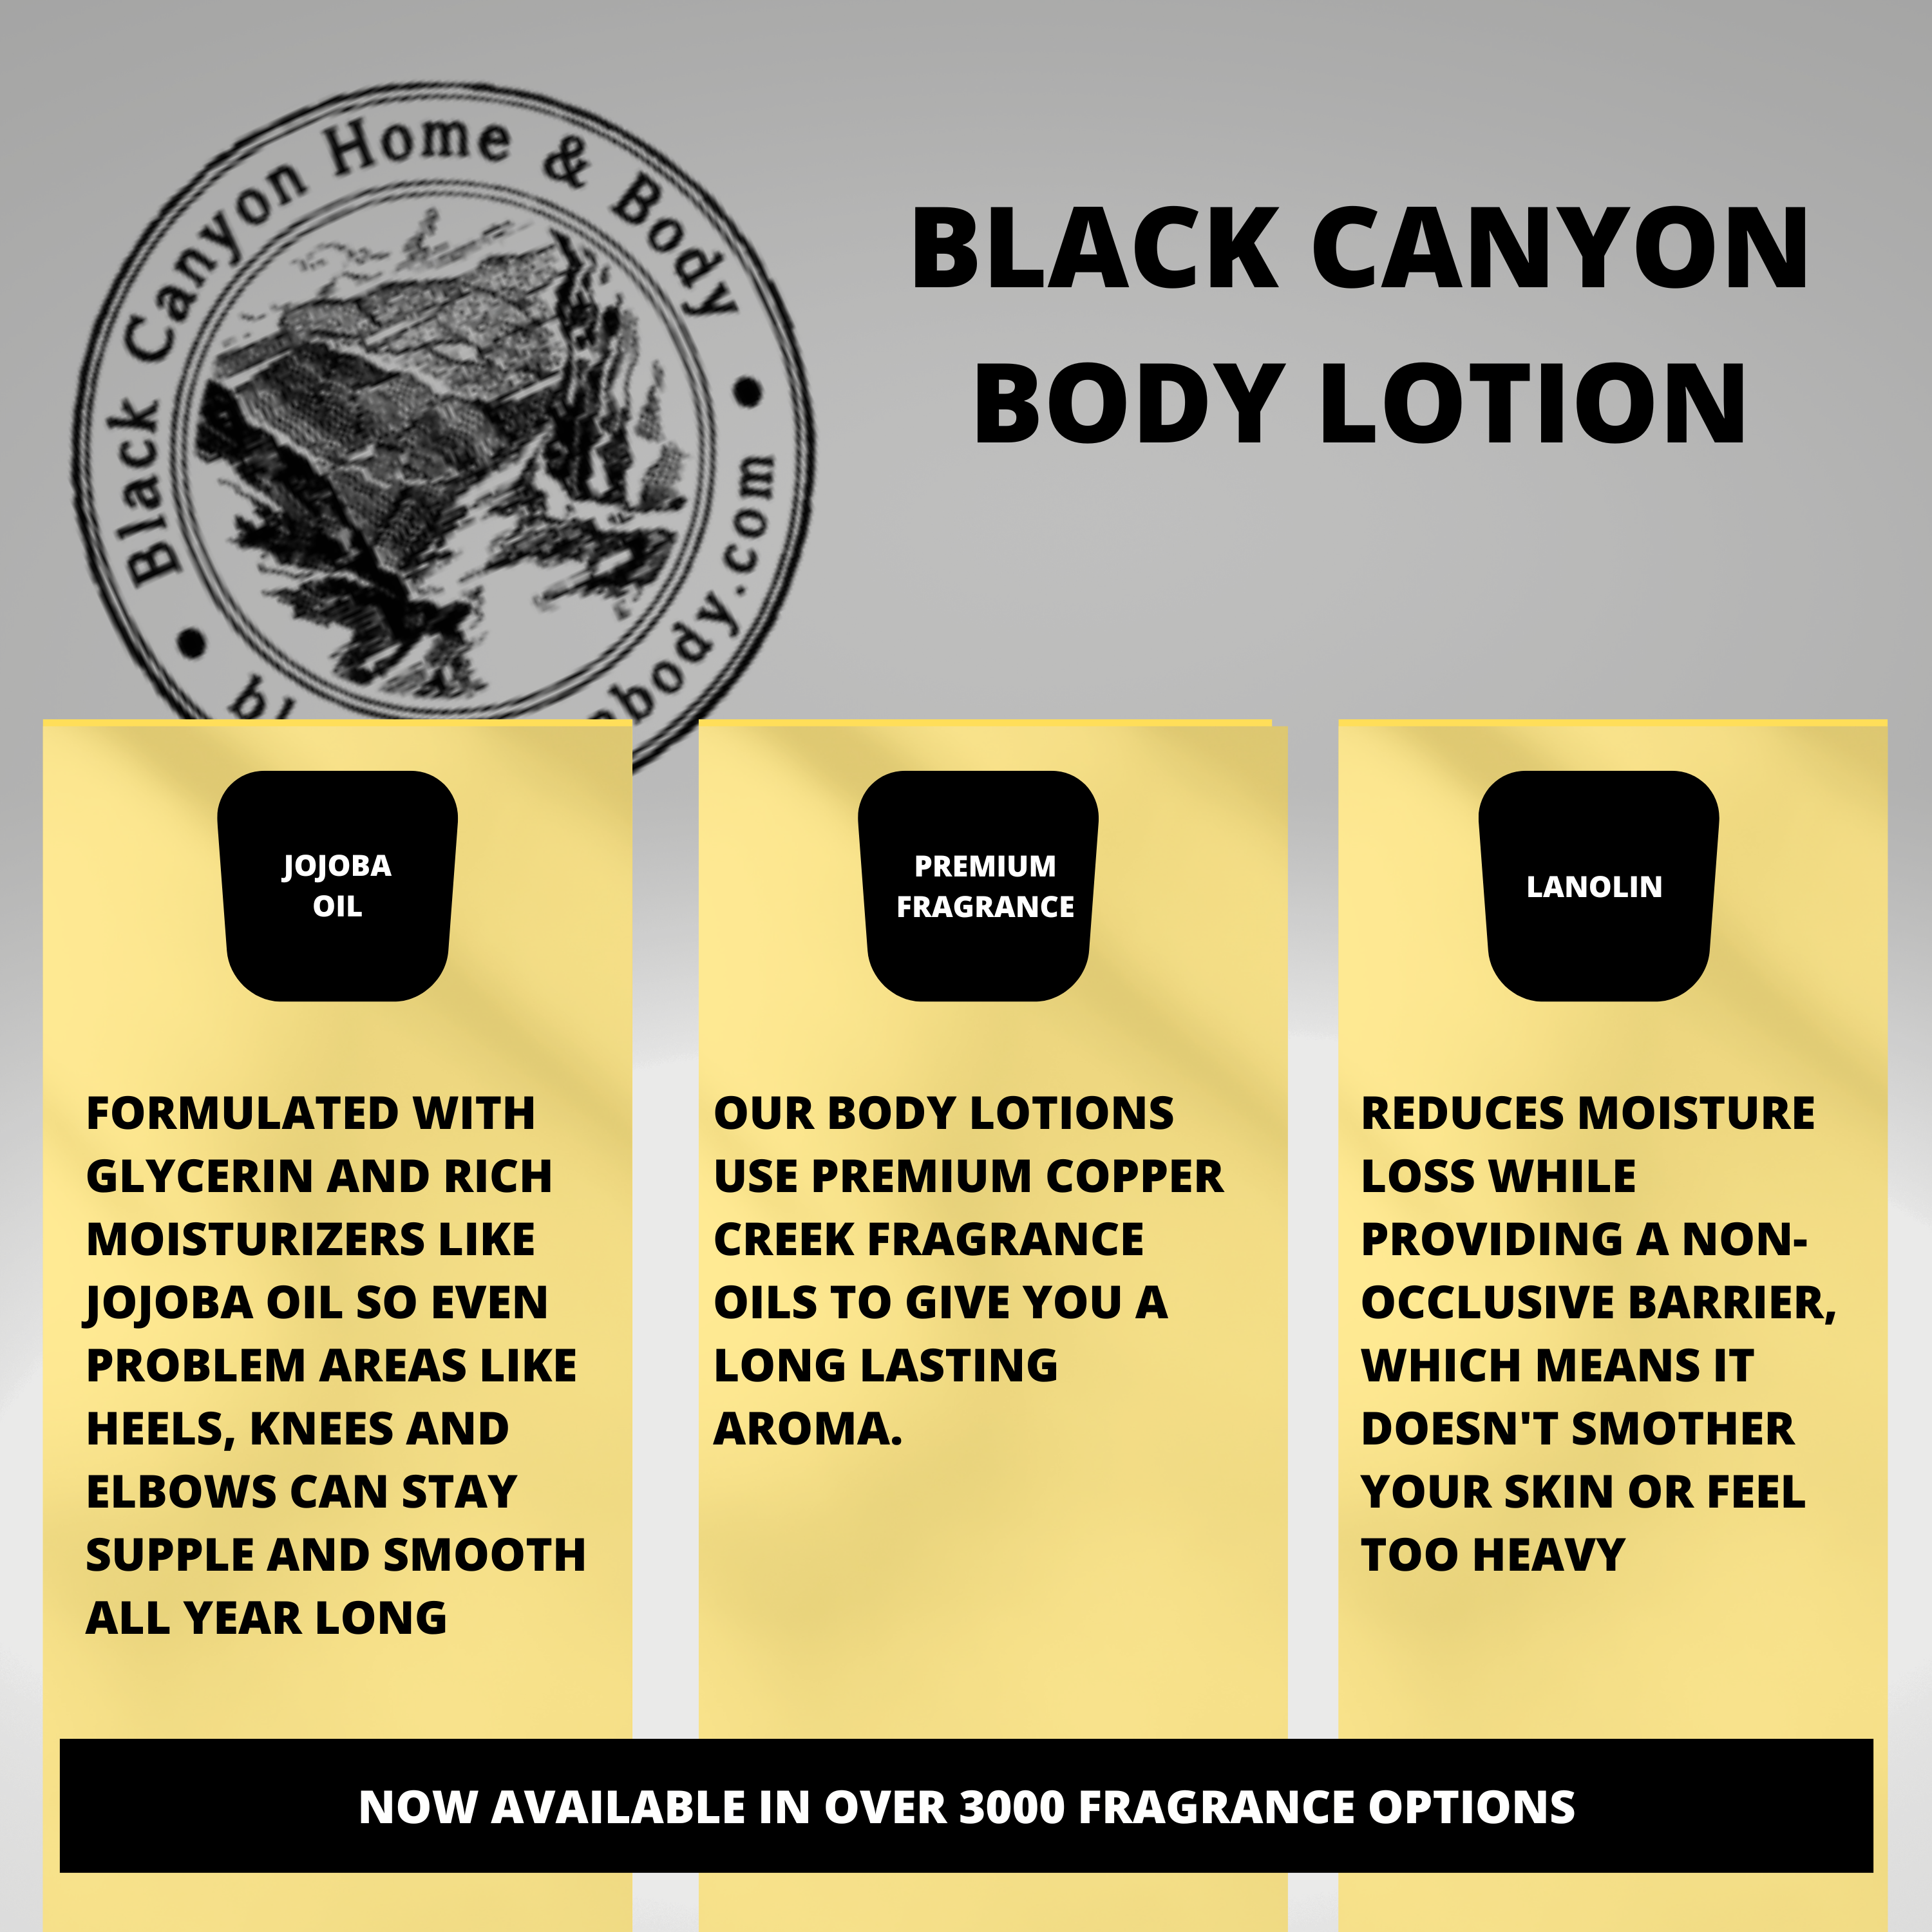 Black Canyon Autumn Spiced Fir Scented Luxury Body Lotion with Lanolin and Jojoba Oil